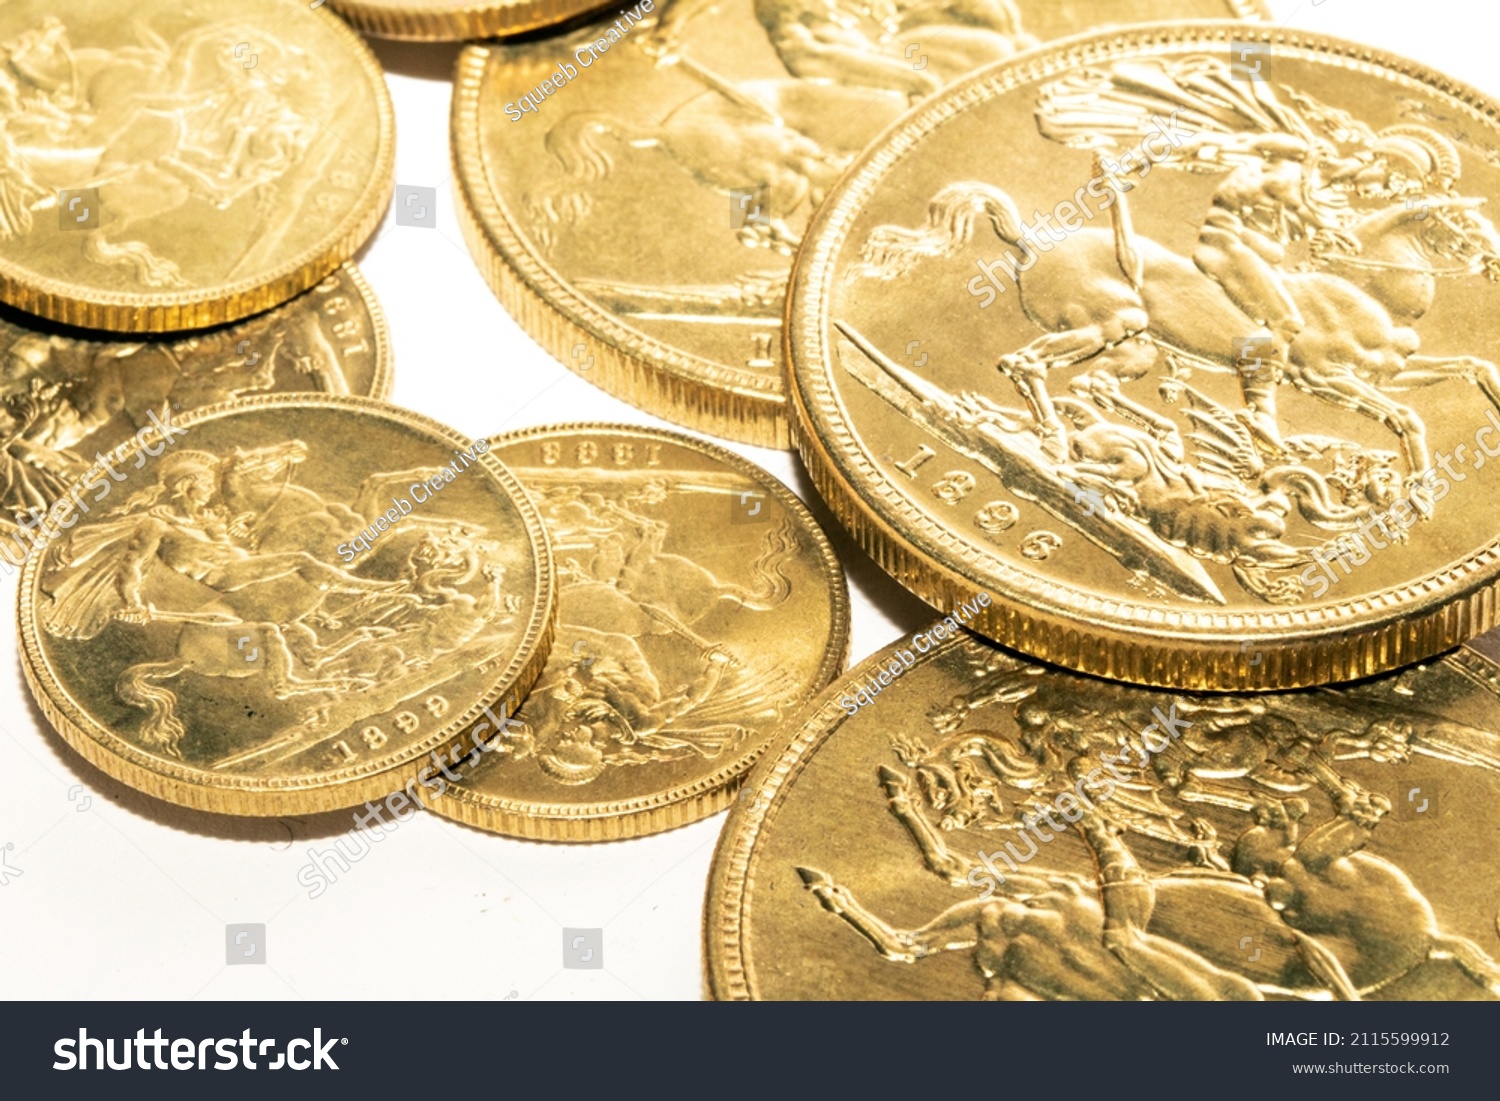 A Gold Sovereign Coins Bullion on a White Background #2115599912